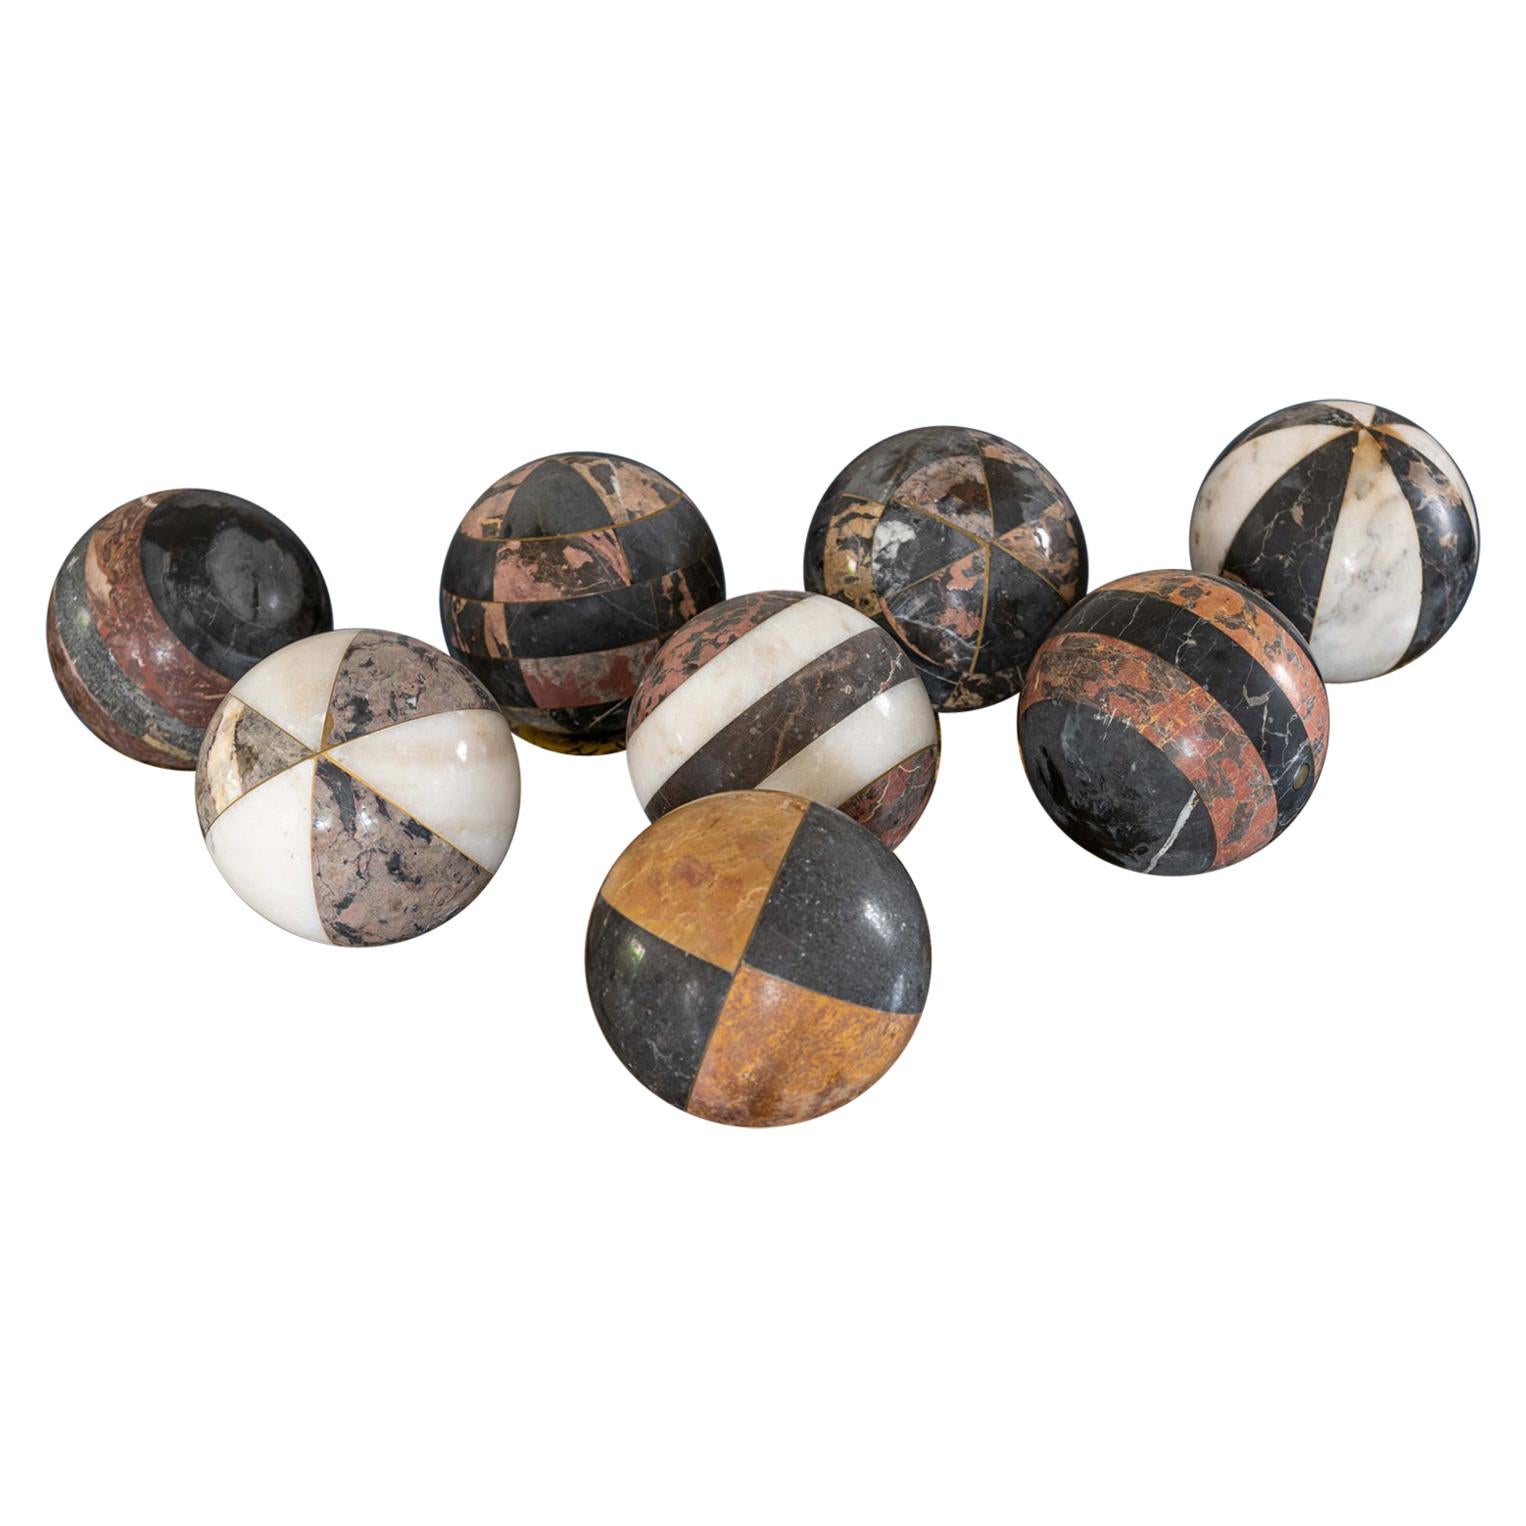 Set of 8 Decorative French Early 20th Century Marble Spheres Balls